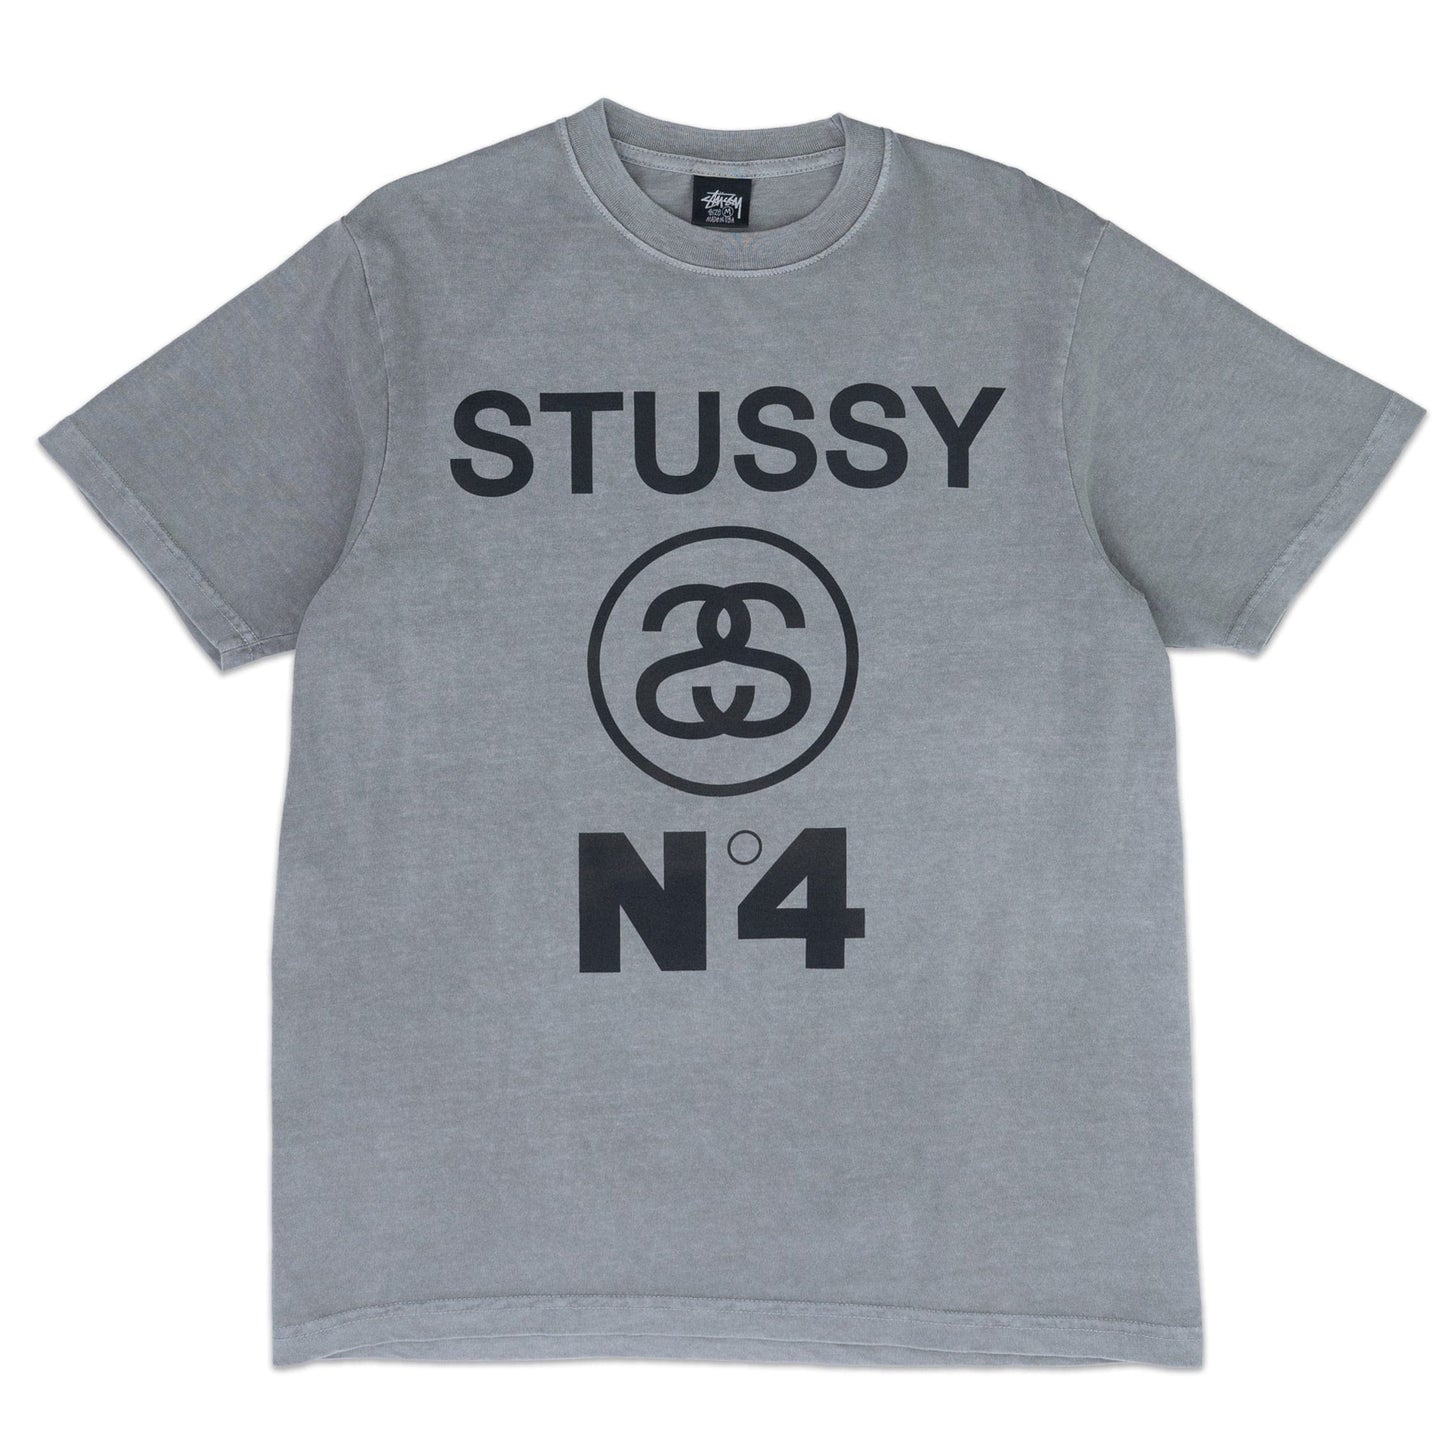 Stussy No. 4 Pigment Dyed Tee Shirt Mens